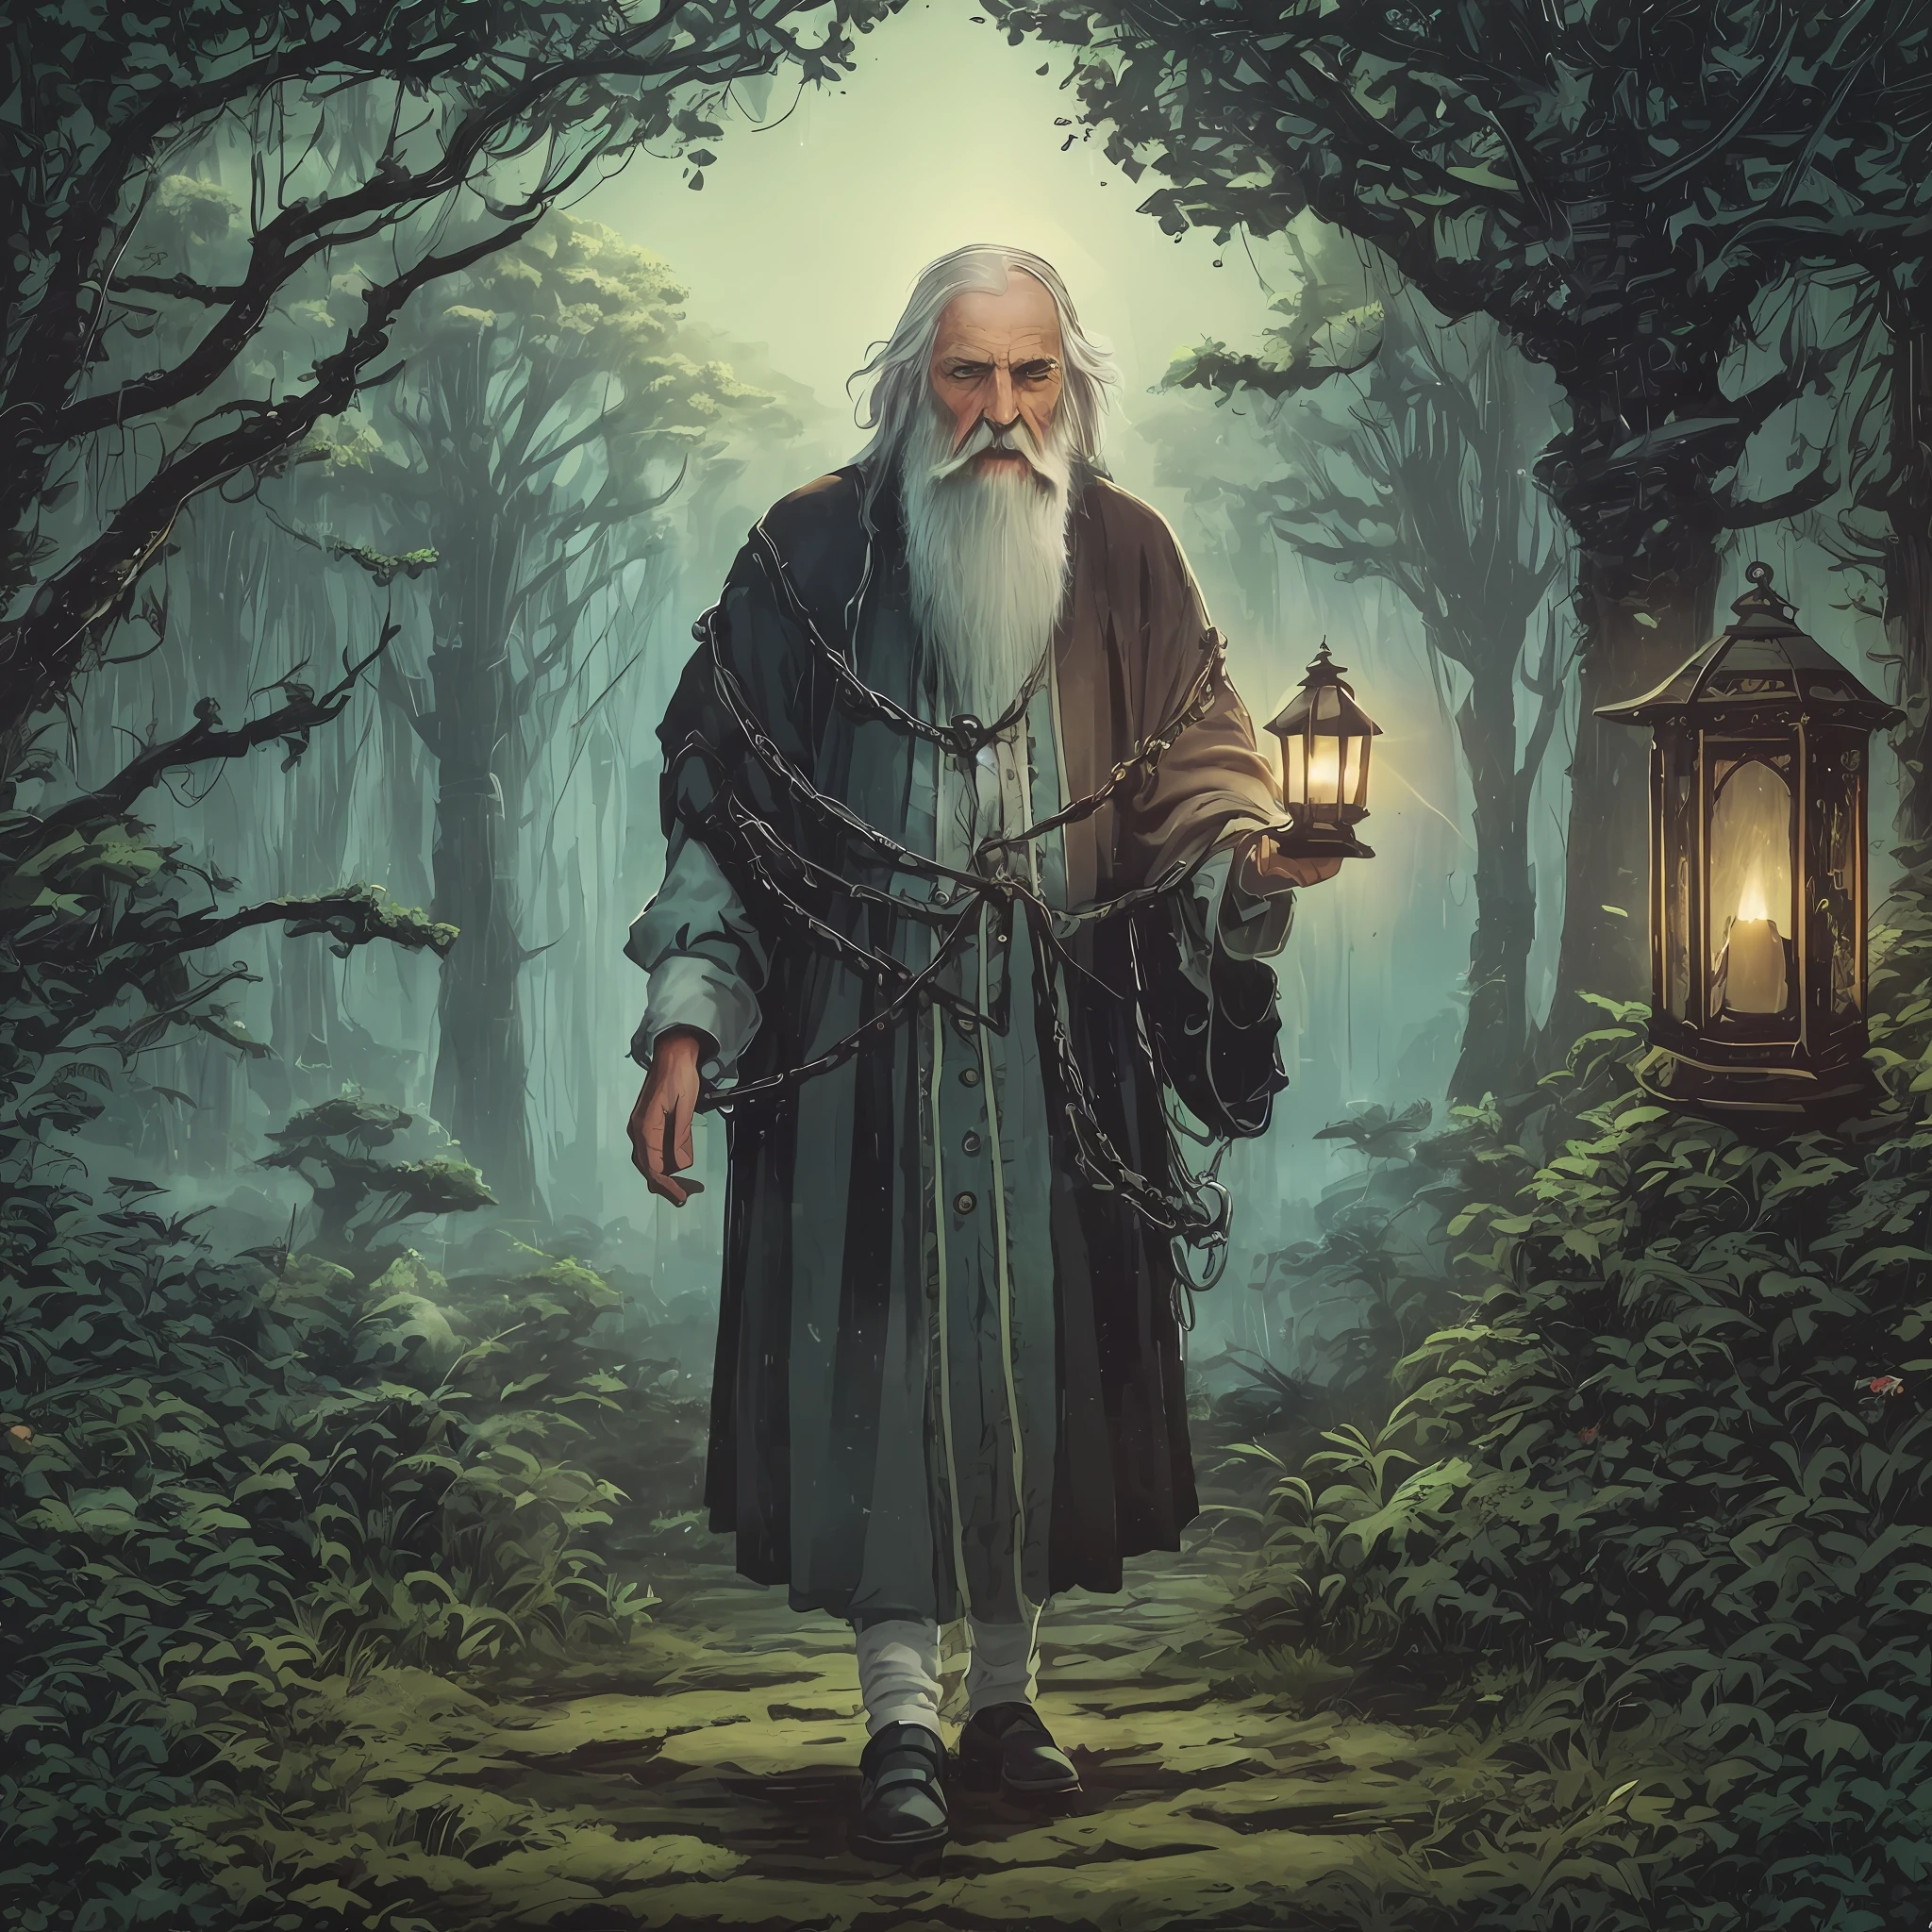 The Hermit card in the Tarot depicts an elderly man with a long beard and gray hair, dressed in simple clothes and holding a lantern in his hand. He is in a contemplative posture, his gaze fixed on the ground as he walks slowly with the aid of a cane. The Hermit is a symbol of wisdom, introspection and spiritual pursuit. Its appearance reflects the years of experience and knowledge accumulated over time. It represents the search for inner truth and the desire to connect with the deepest self. The lantern in his hand symbolizes the light of wisdom he carries with him, illuminating the path of people seeking guidance and understanding. The Hermit walks alone, away from the outside world, in search of answers and meaning. He reminds us of the importance of withdrawing from the noise and hustle and bustle of the world to reflect on our lives and find our own truth. The Hermit's letter encourages us to seek inner wisdom, to ask deep questions, and to find answers within ourselves. It is an invitation to introspection, self-knowledge, and the spiritual journey in search of enlightenment.